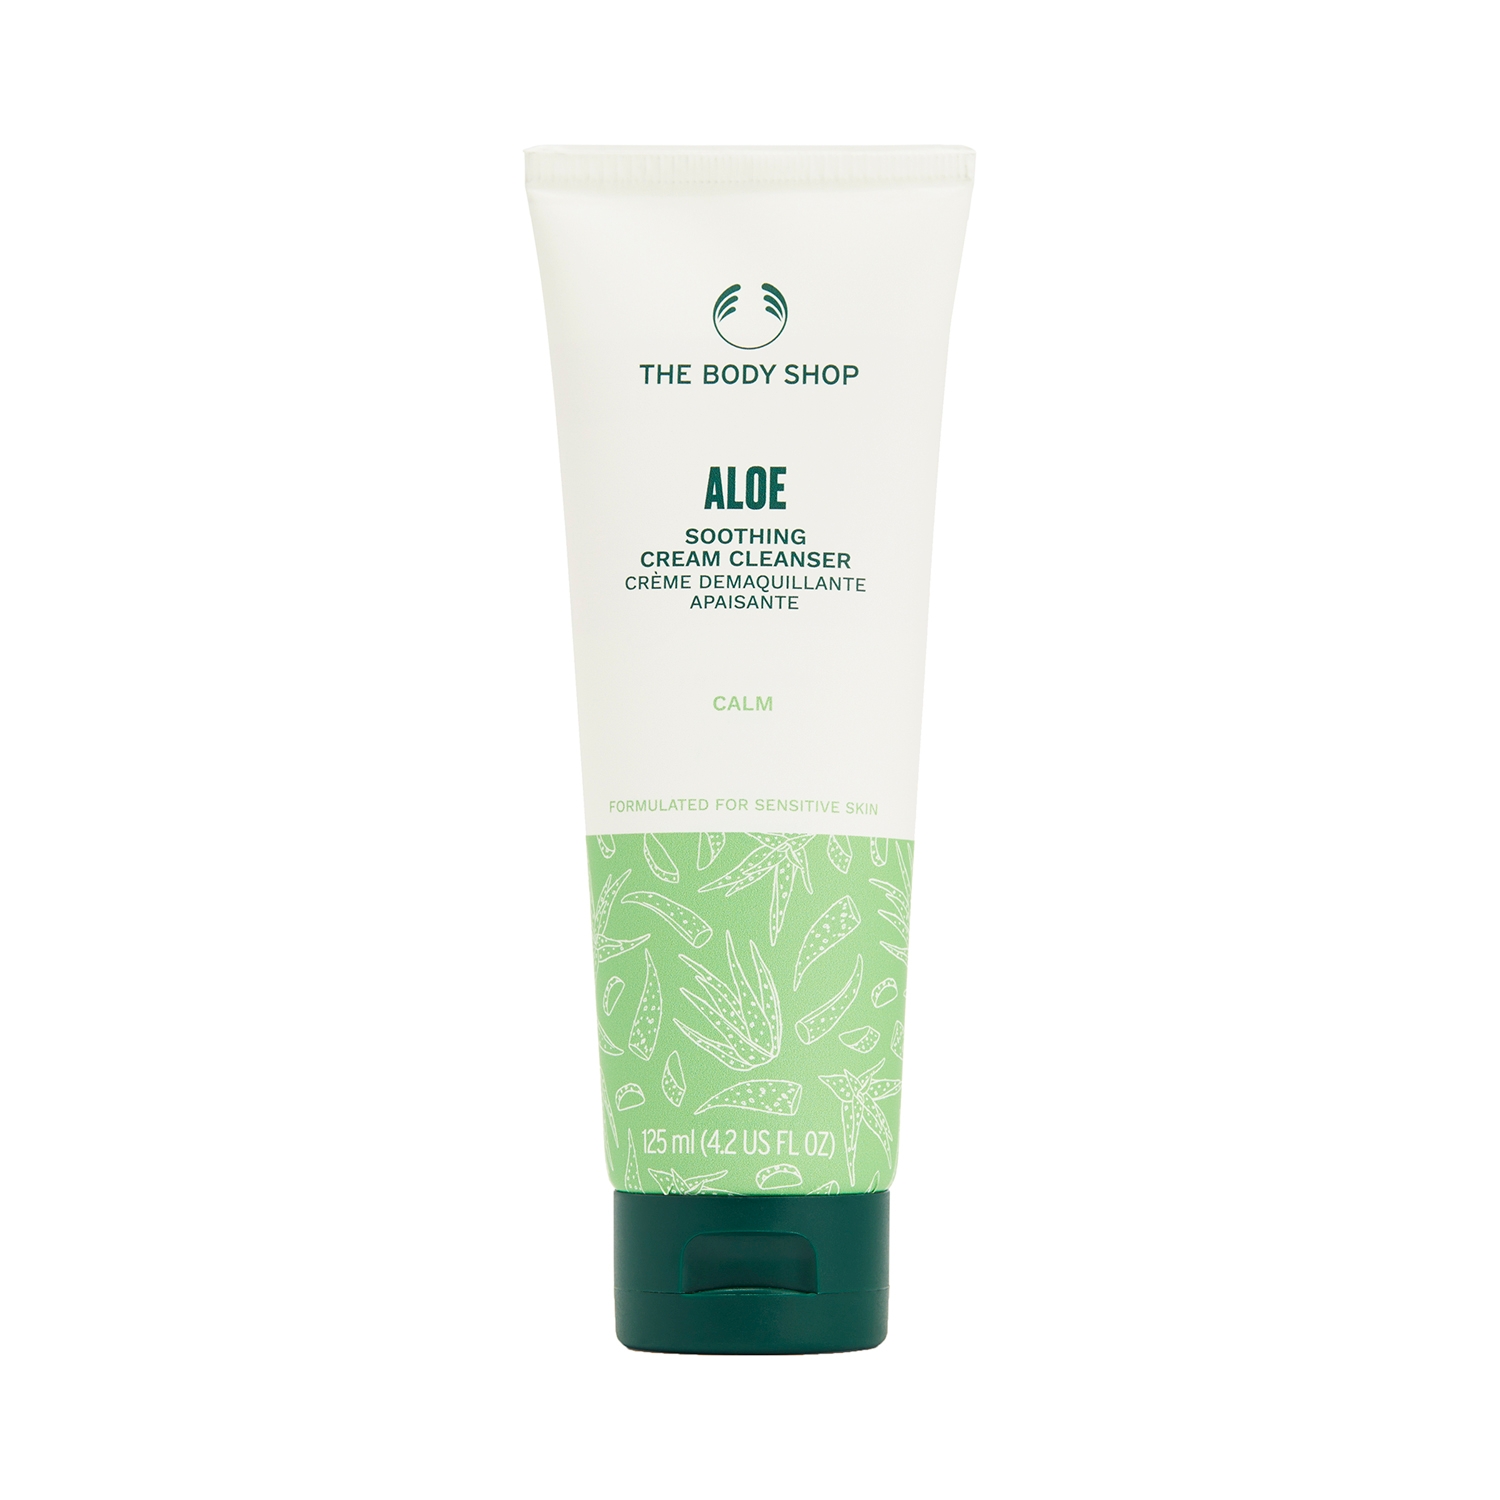 The Body Shop | The Body Shop Aloe Soothing Cream Cleanser (125ml)